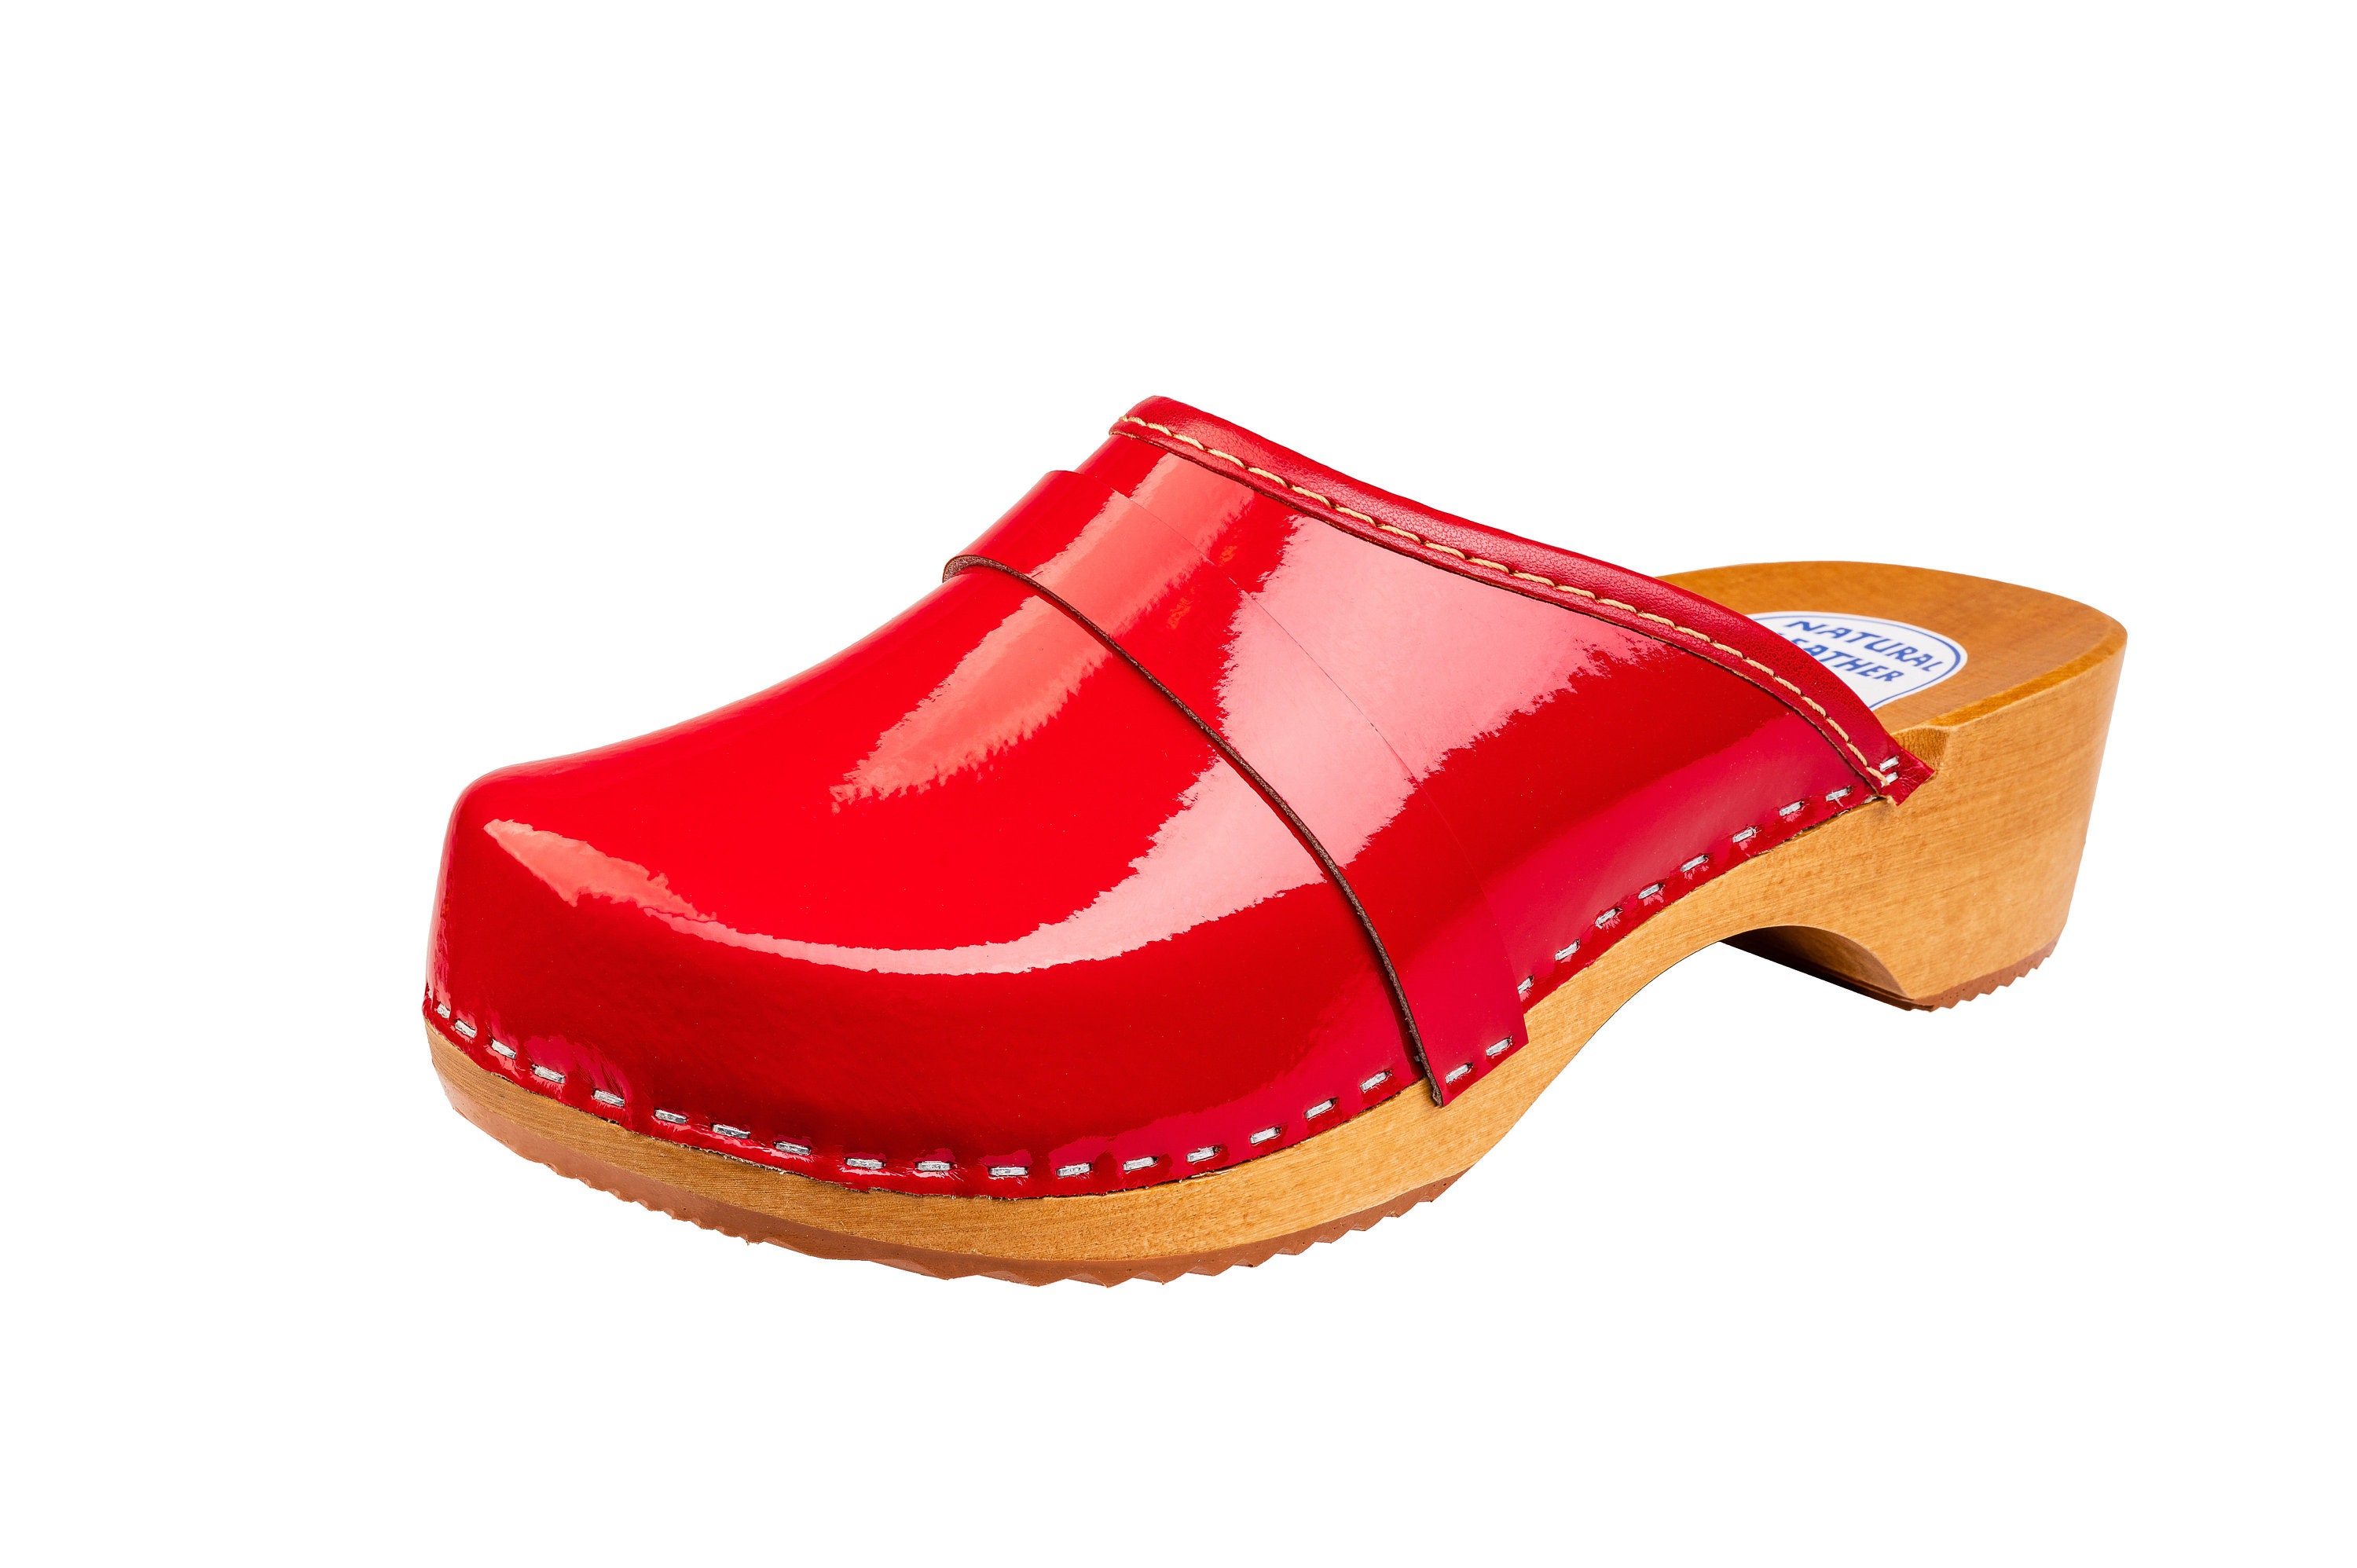 Women's Leather Swedish Clogs / Red Leather Clogs / - Etsy